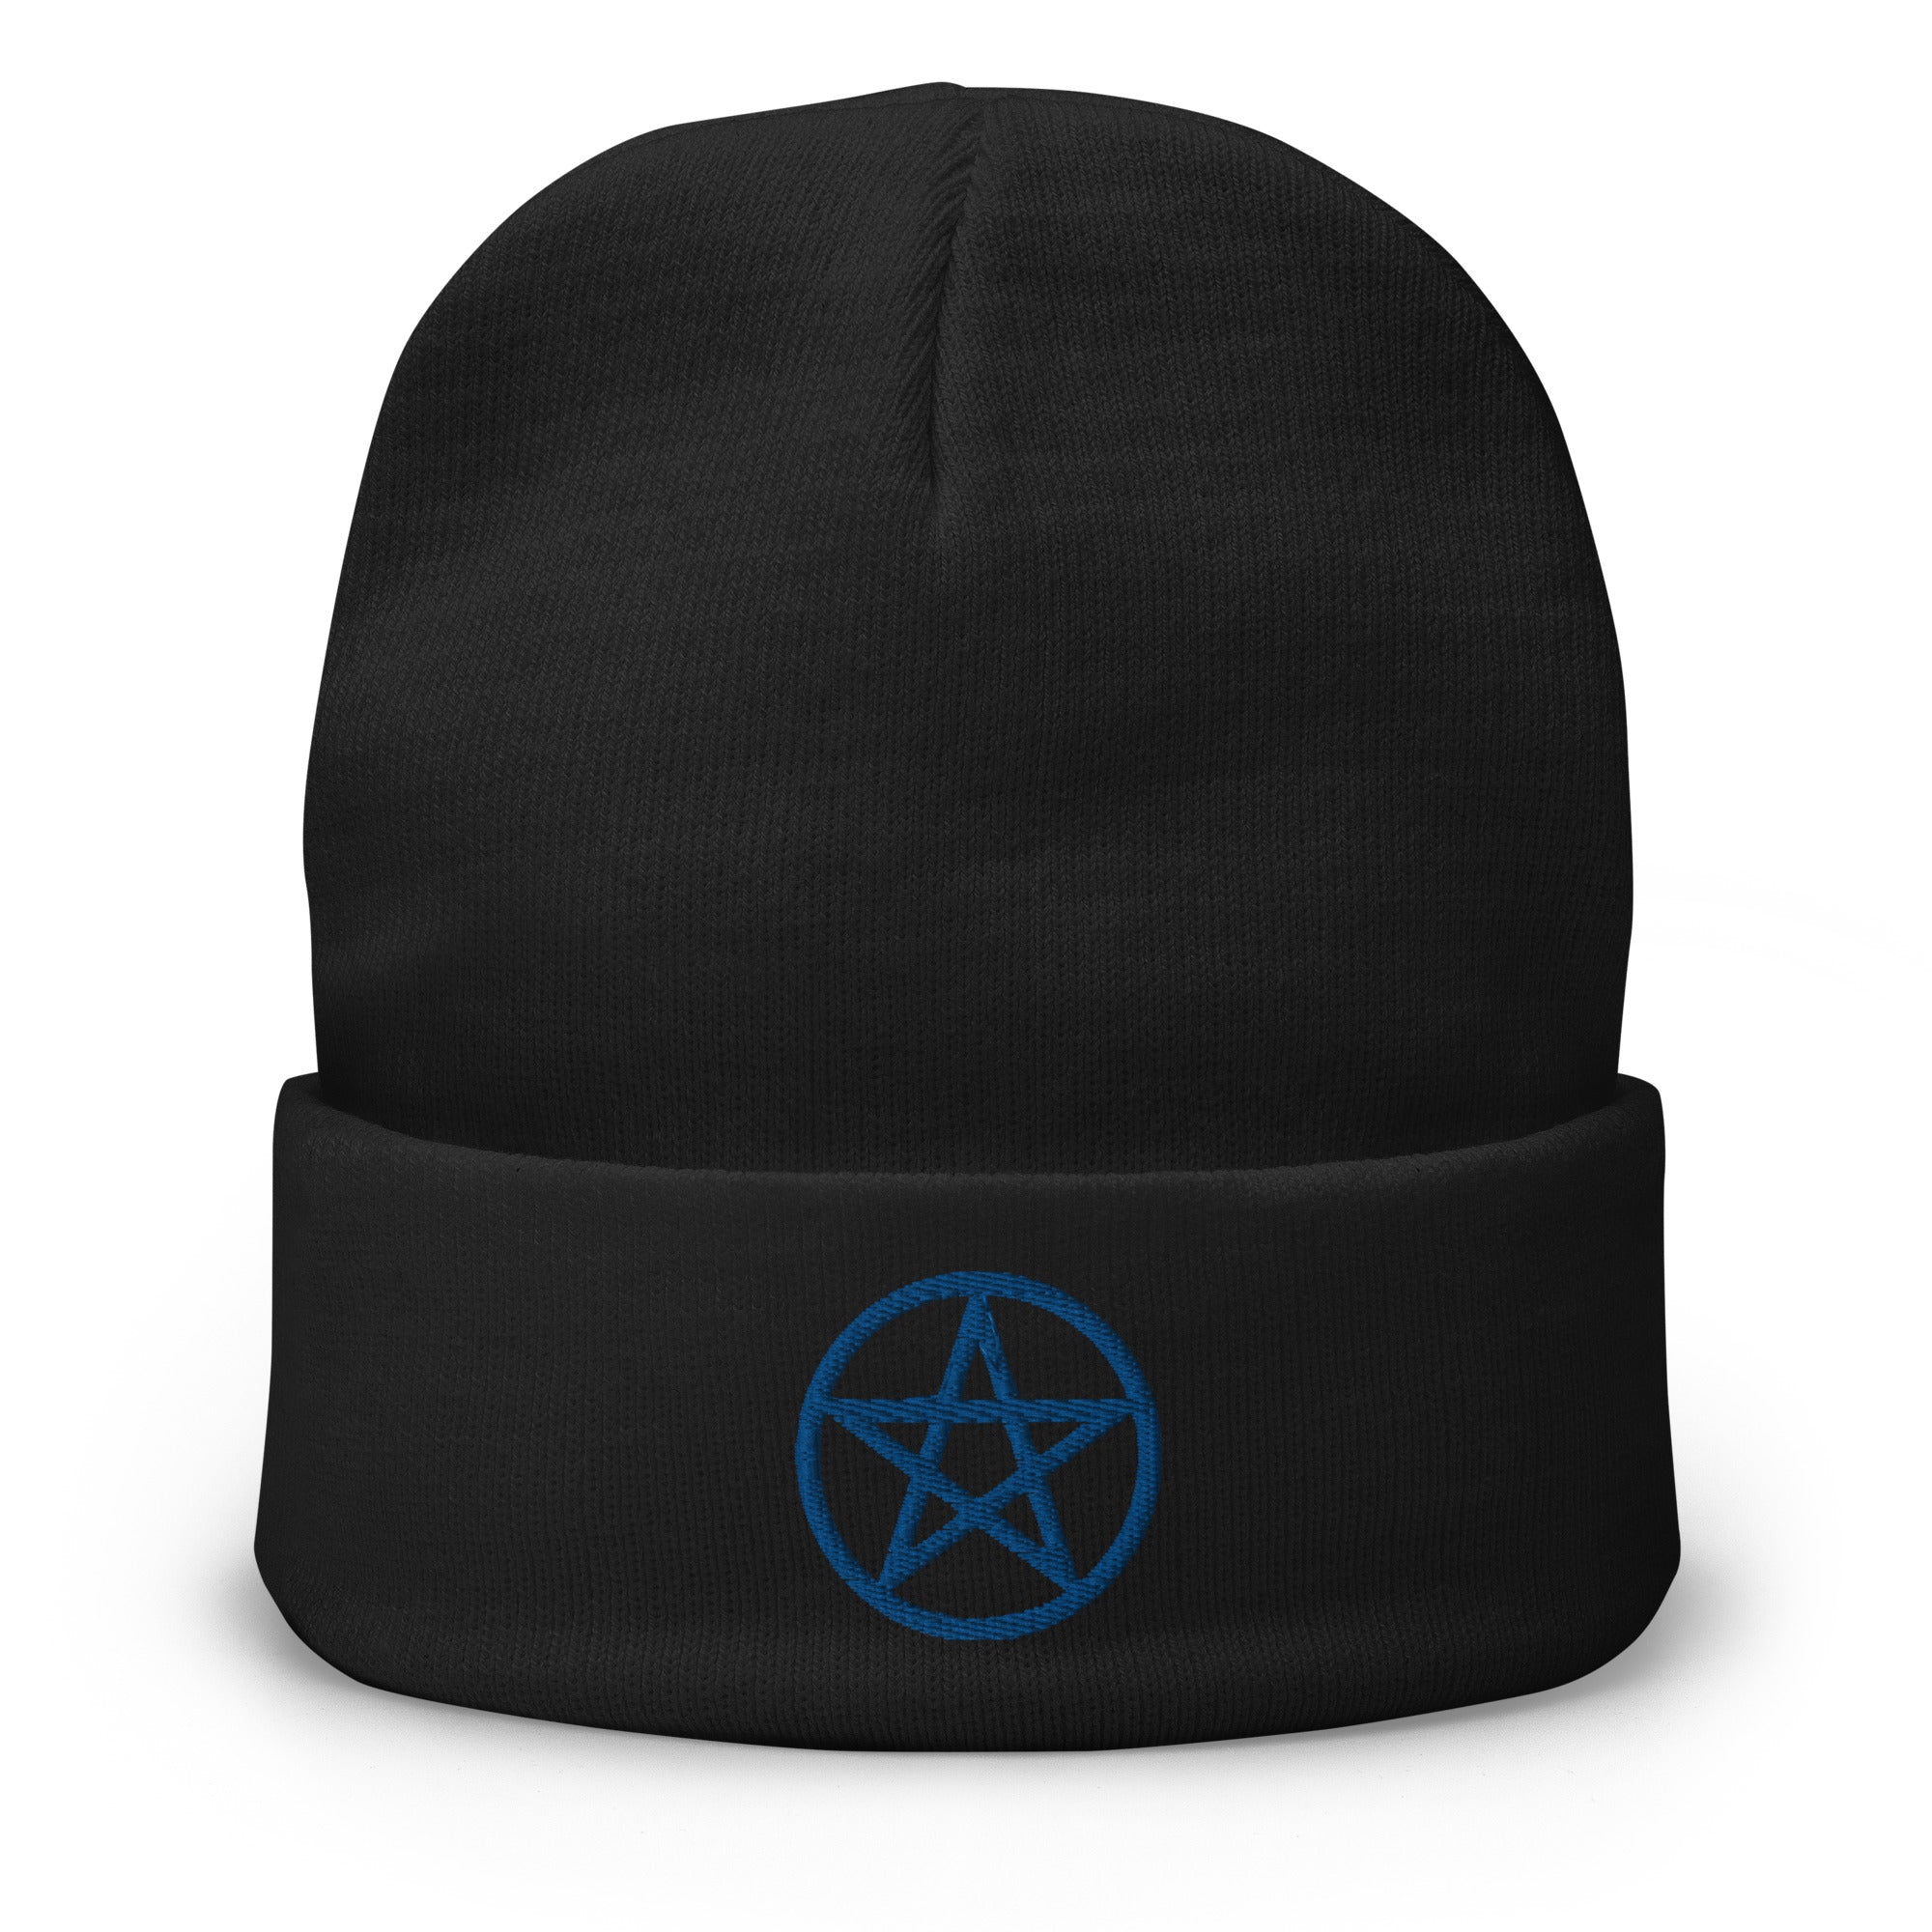 Wiccan Witchcraft Pentagram Embroidered Cuff Beanie Pagan Ritual - Edge of Life Designs